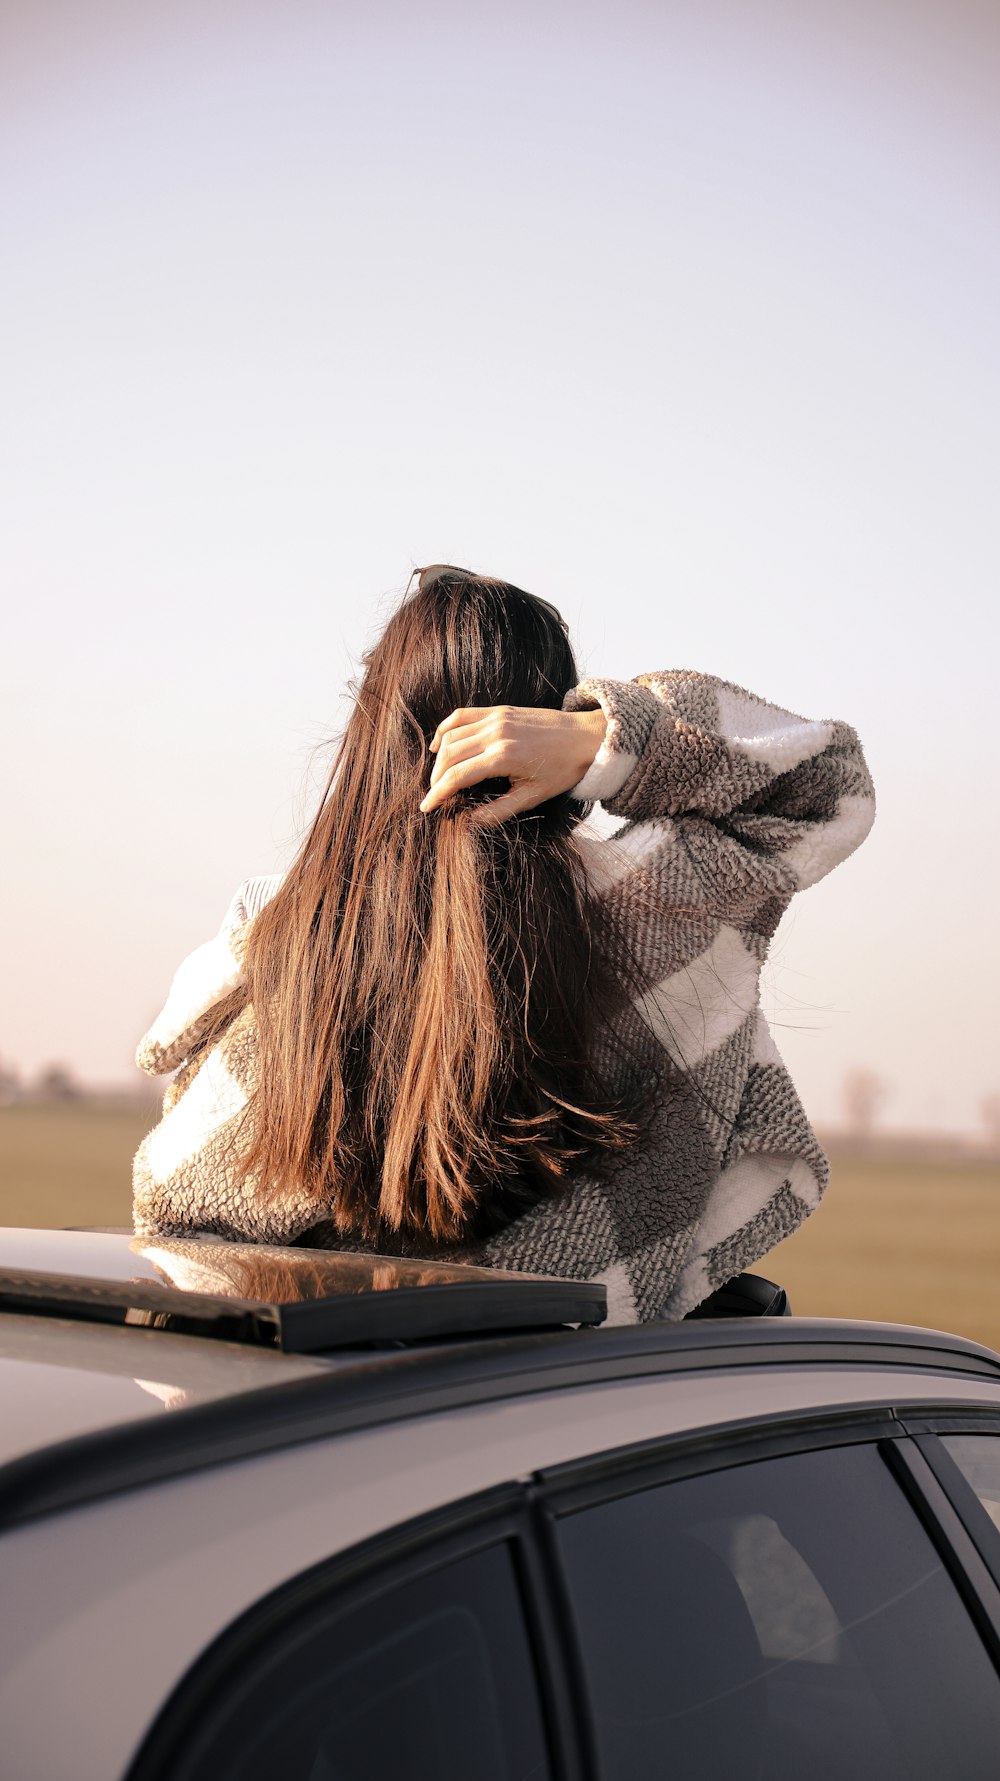 a woman with long hair sitting on top of a car